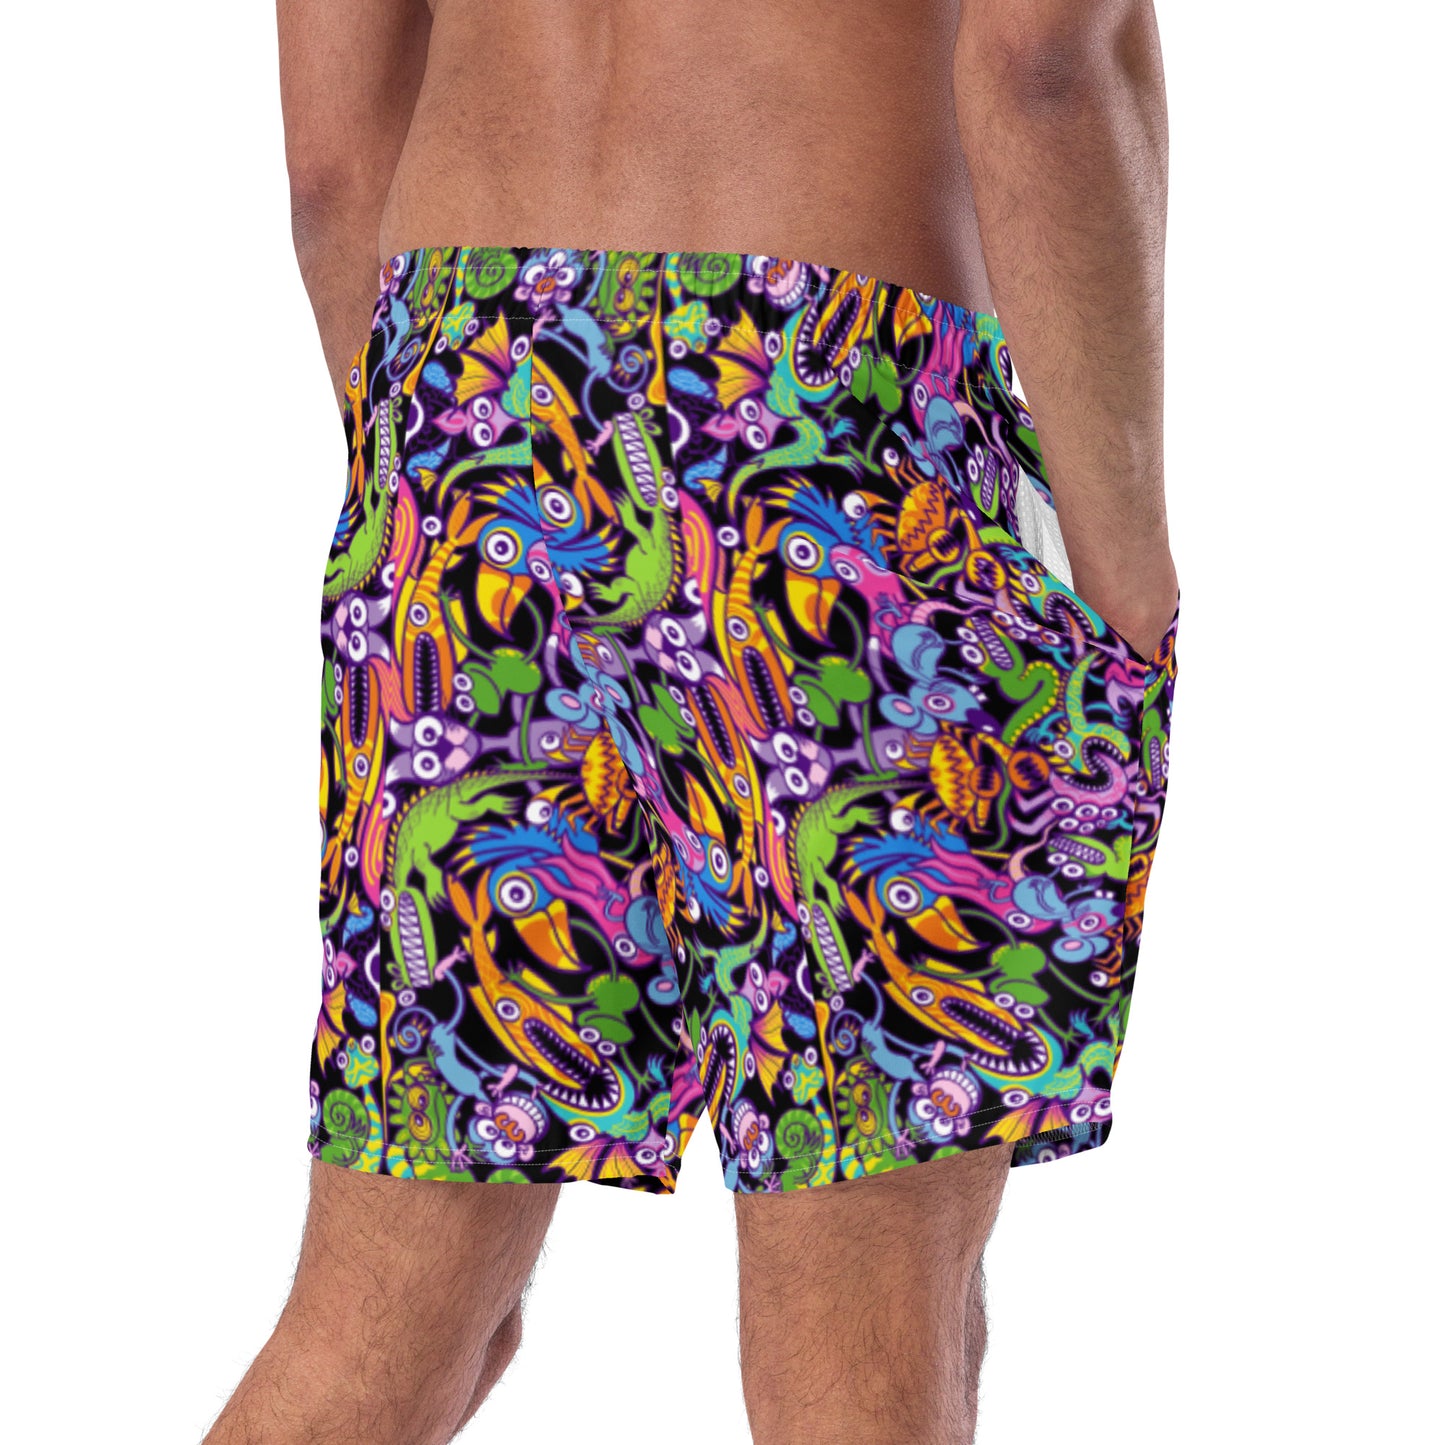 Eccentric critters in a lively crazy festival Men's swim trunks. Back view